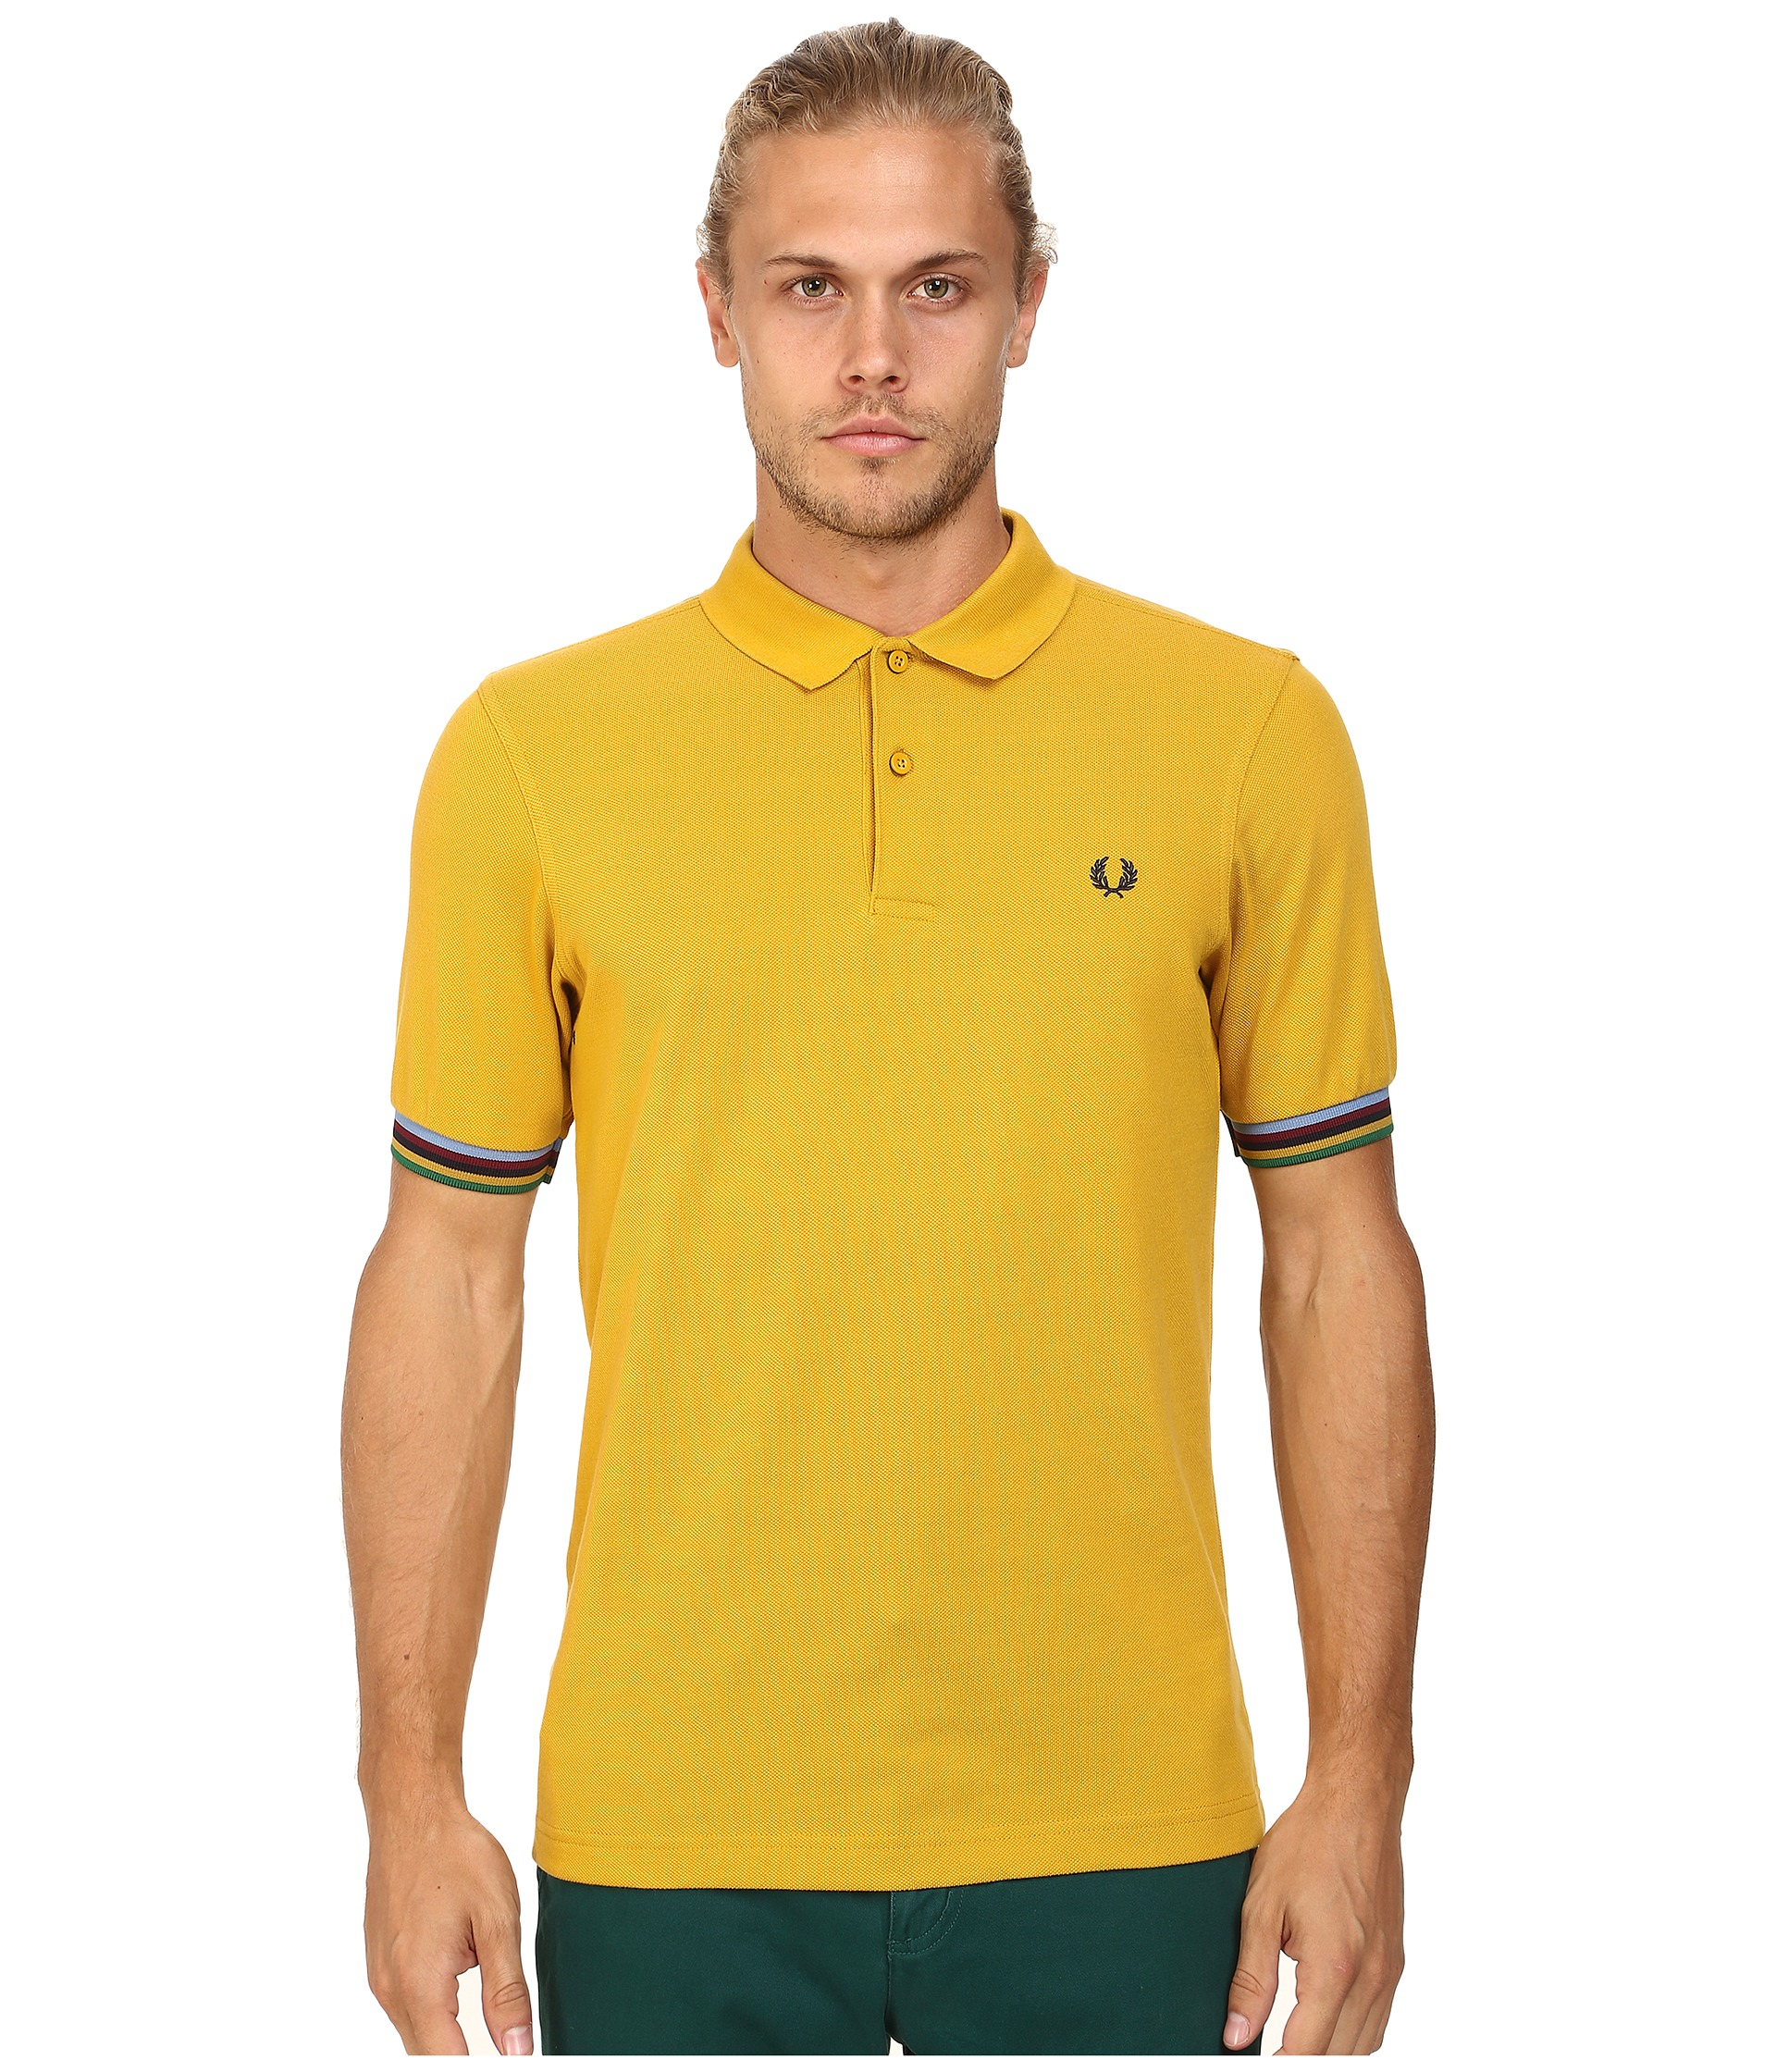 Fred Perry Champion Tipped Shirt in Yellow for Men - Lyst